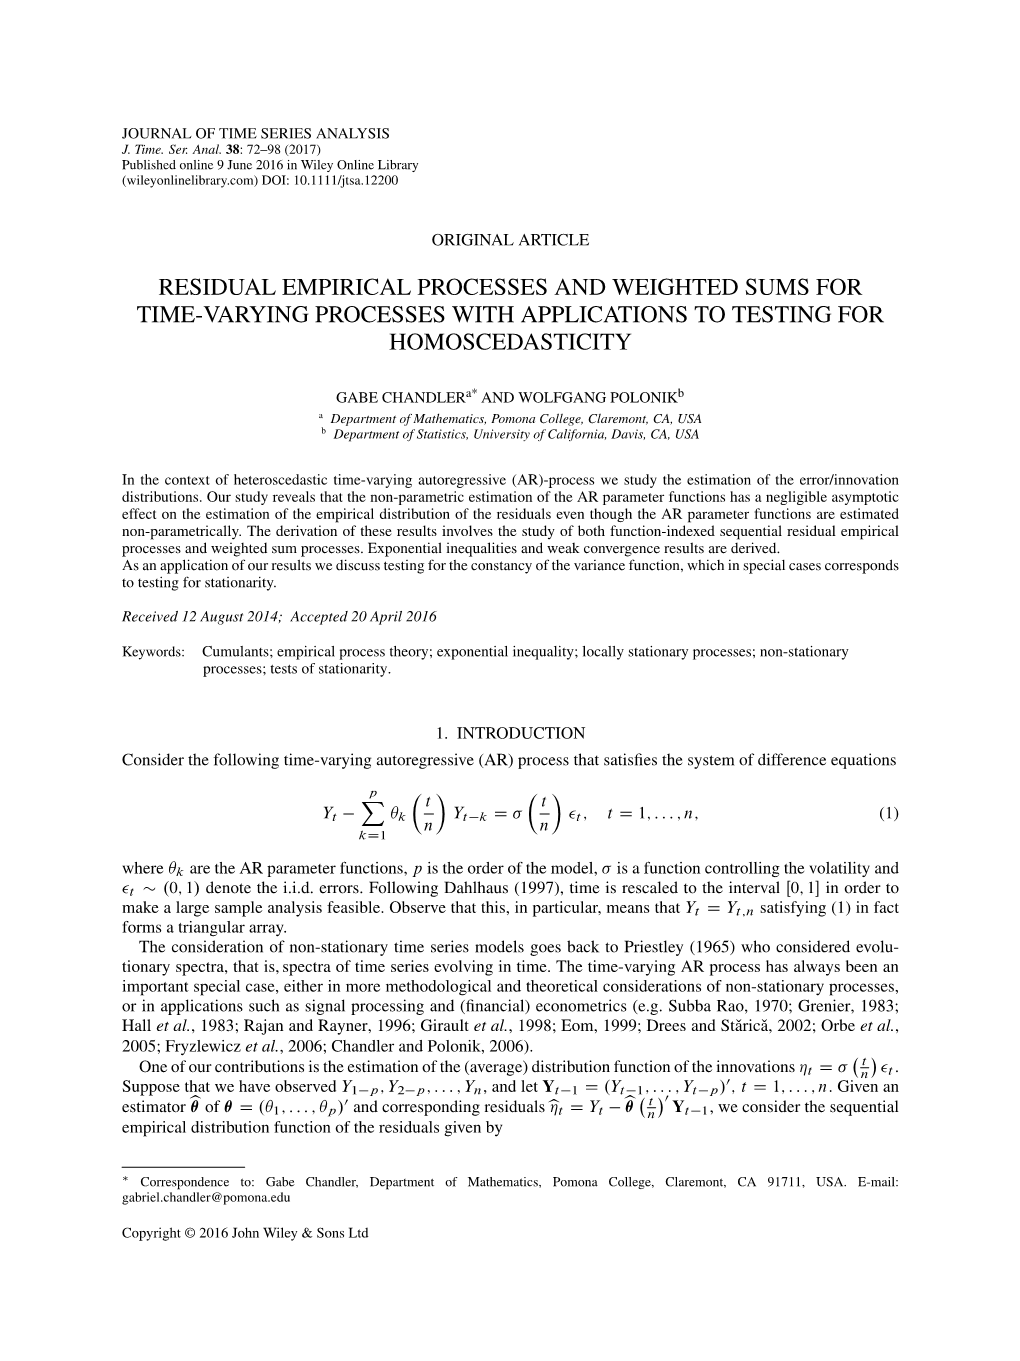 Weighted Sums and Residual Empirical Processes For